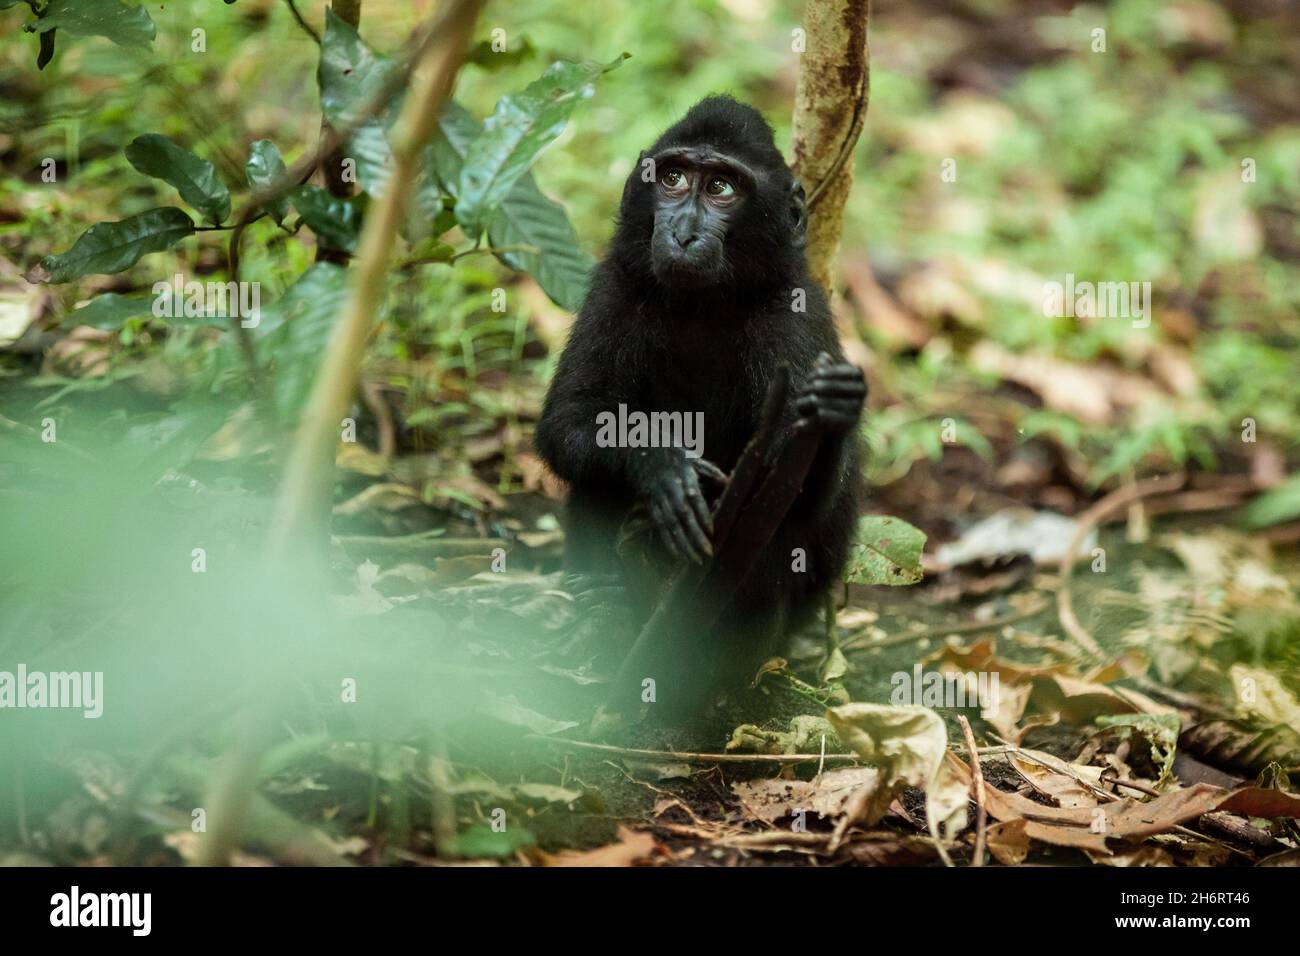 A cute Celebes crested macaque holds a piece of wood, Tangkoko National Park, Indonesia Stock Photo